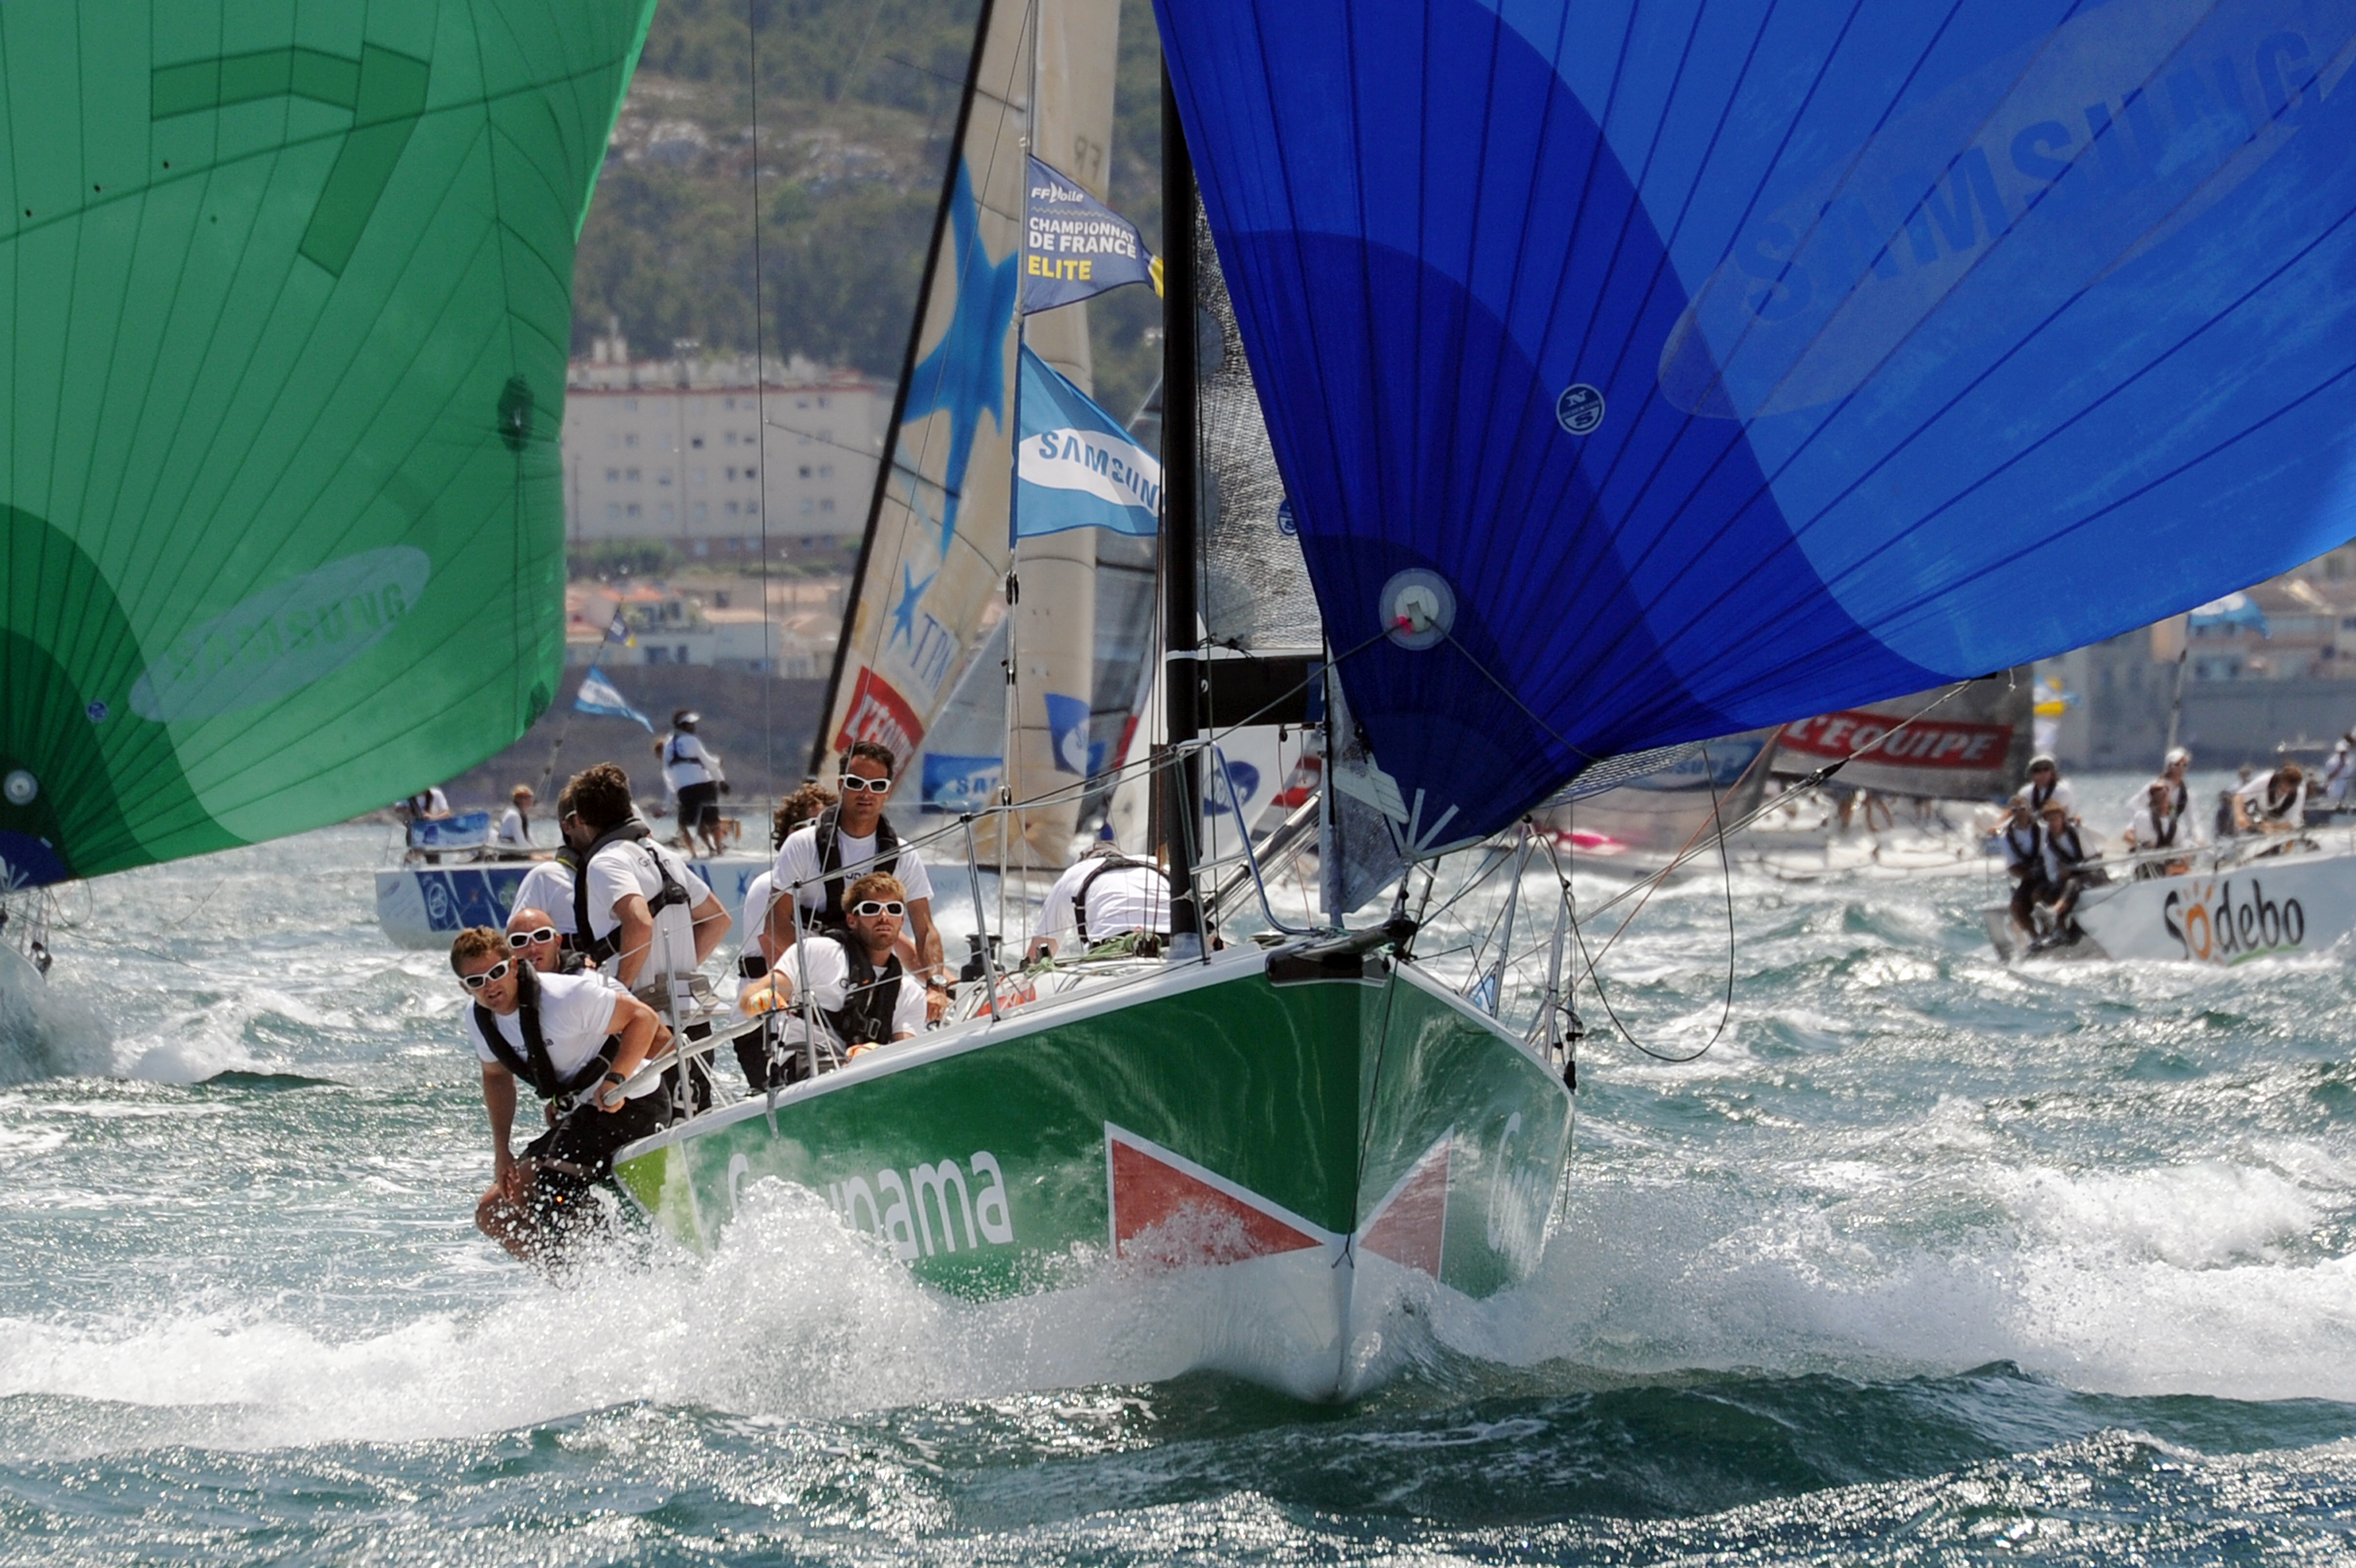 French skipper Franck Cammas (2nd R) and his Groupama 34 crew compete on July 27, 2013 in Marseille, southern France, during the last stage of the Tour de France sailing race between the French southern coastal cities of La Seyne-sur-Mer and Marseille. Cammas and his crew won the overall standings of the competition which left from Dunkerque, northern France, on June 28. (credit: ANNE-CHRISTINE POUJOULAT/AFP/Getty Images)